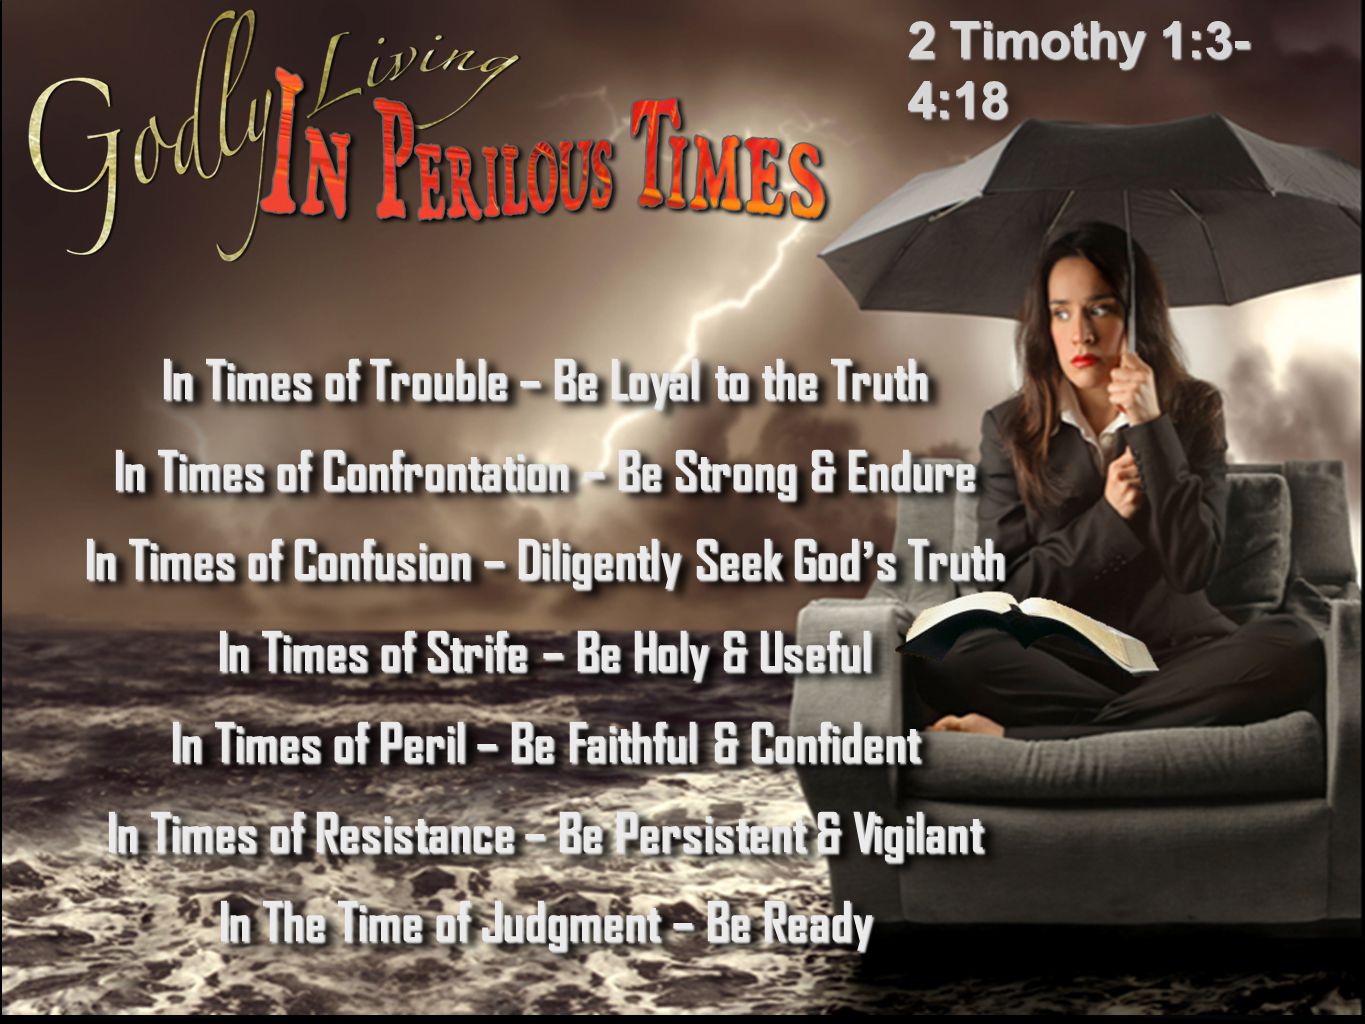 2 Timothy 1:3- 4:18 In Times of Trouble – Be Loyal to the Truth In Times of Confrontation – Be Strong & Endure In Times of Confusion – Diligently Seek God’s Truth In Times of Strife – Be Holy & Useful In Times of Peril – Be Faithful & Confident In Times of Resistance – Be Persistent & Vigilant In The Time of Judgment – Be Ready In Times of Trouble – Be Loyal to the Truth In Times of Confrontation – Be Strong & Endure In Times of Confusion – Diligently Seek God’s Truth In Times of Strife – Be Holy & Useful In Times of Peril – Be Faithful & Confident In Times of Resistance – Be Persistent & Vigilant In The Time of Judgment – Be Ready